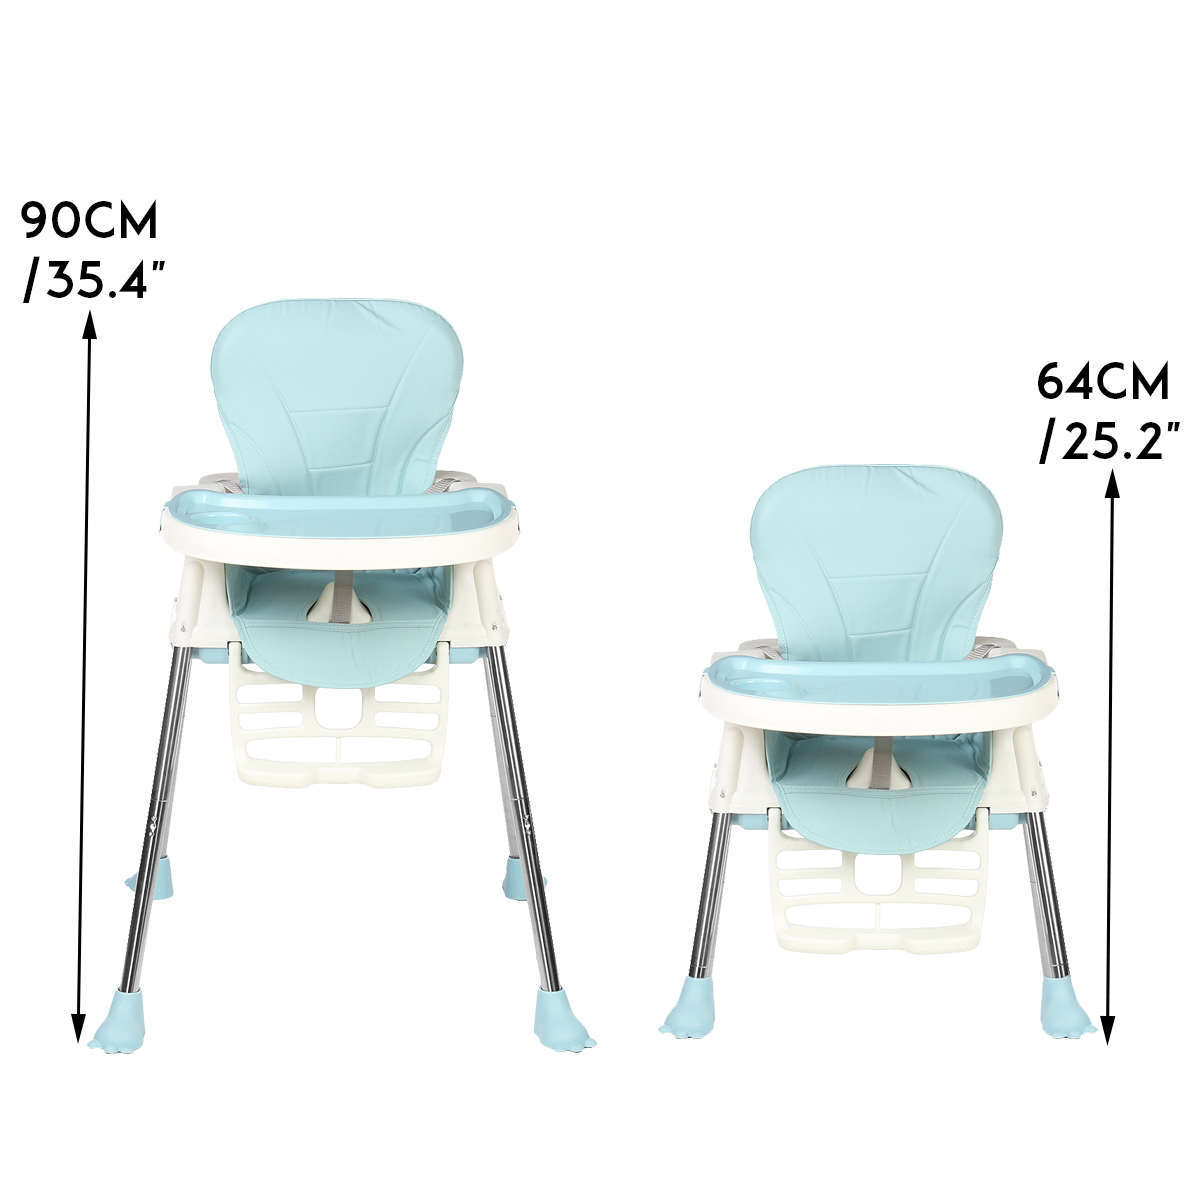 Baby-Dining-Chair-Multifunctional-Portable-Foldable-Safe-Children-Feeding-Chair-1768914-7